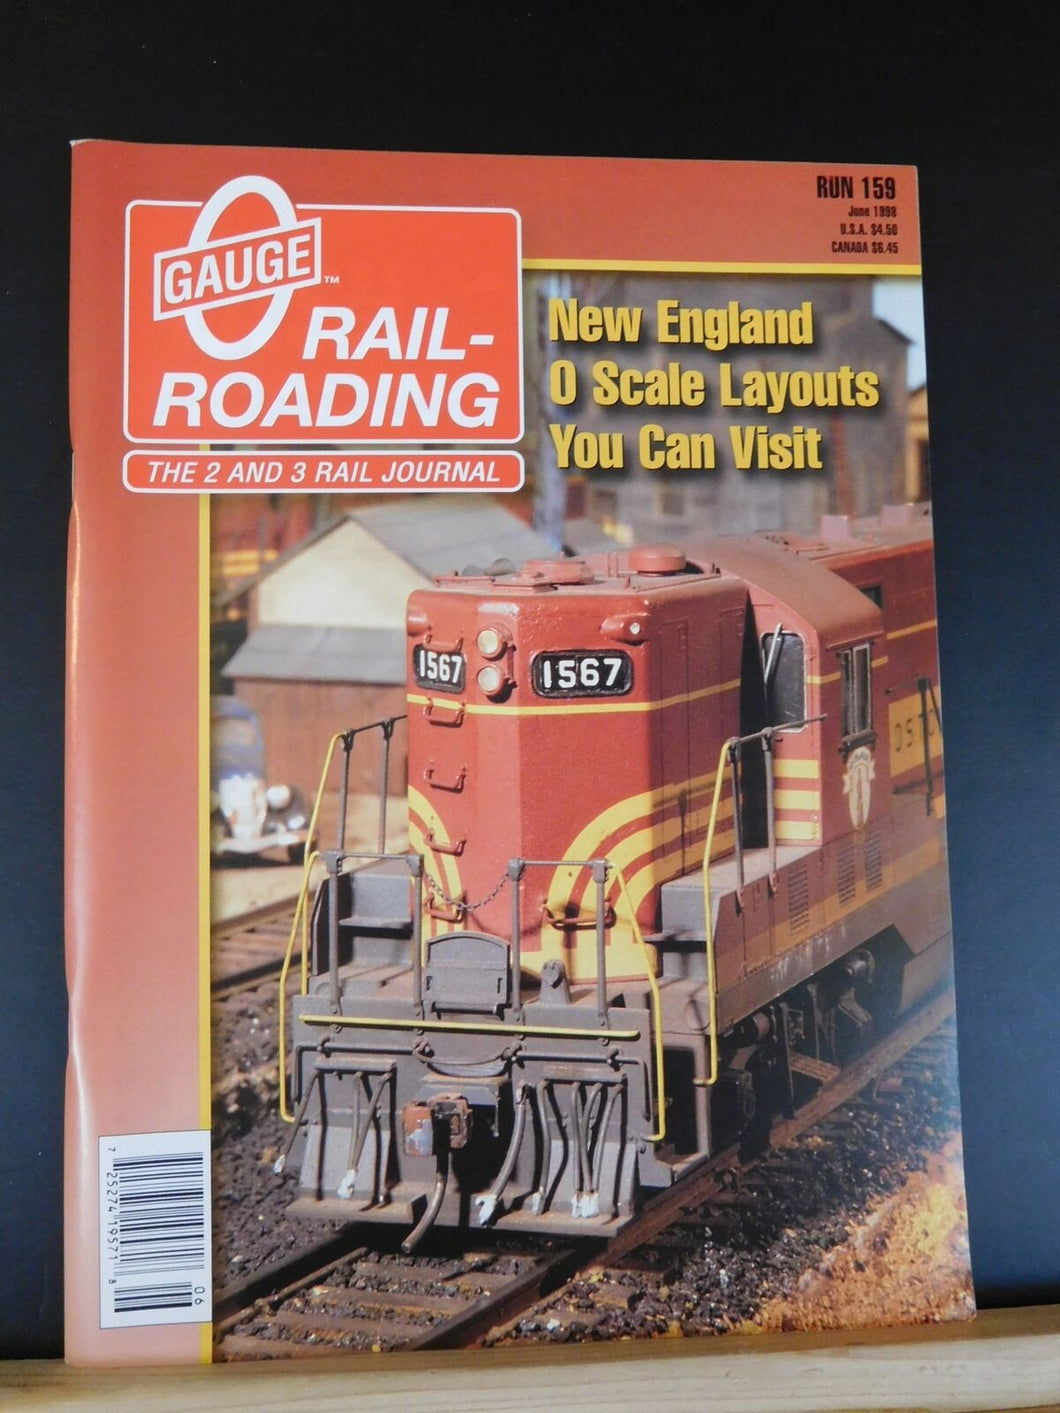 O Gauge Railroading #159 June 1998 New England O scale layouts you can visit